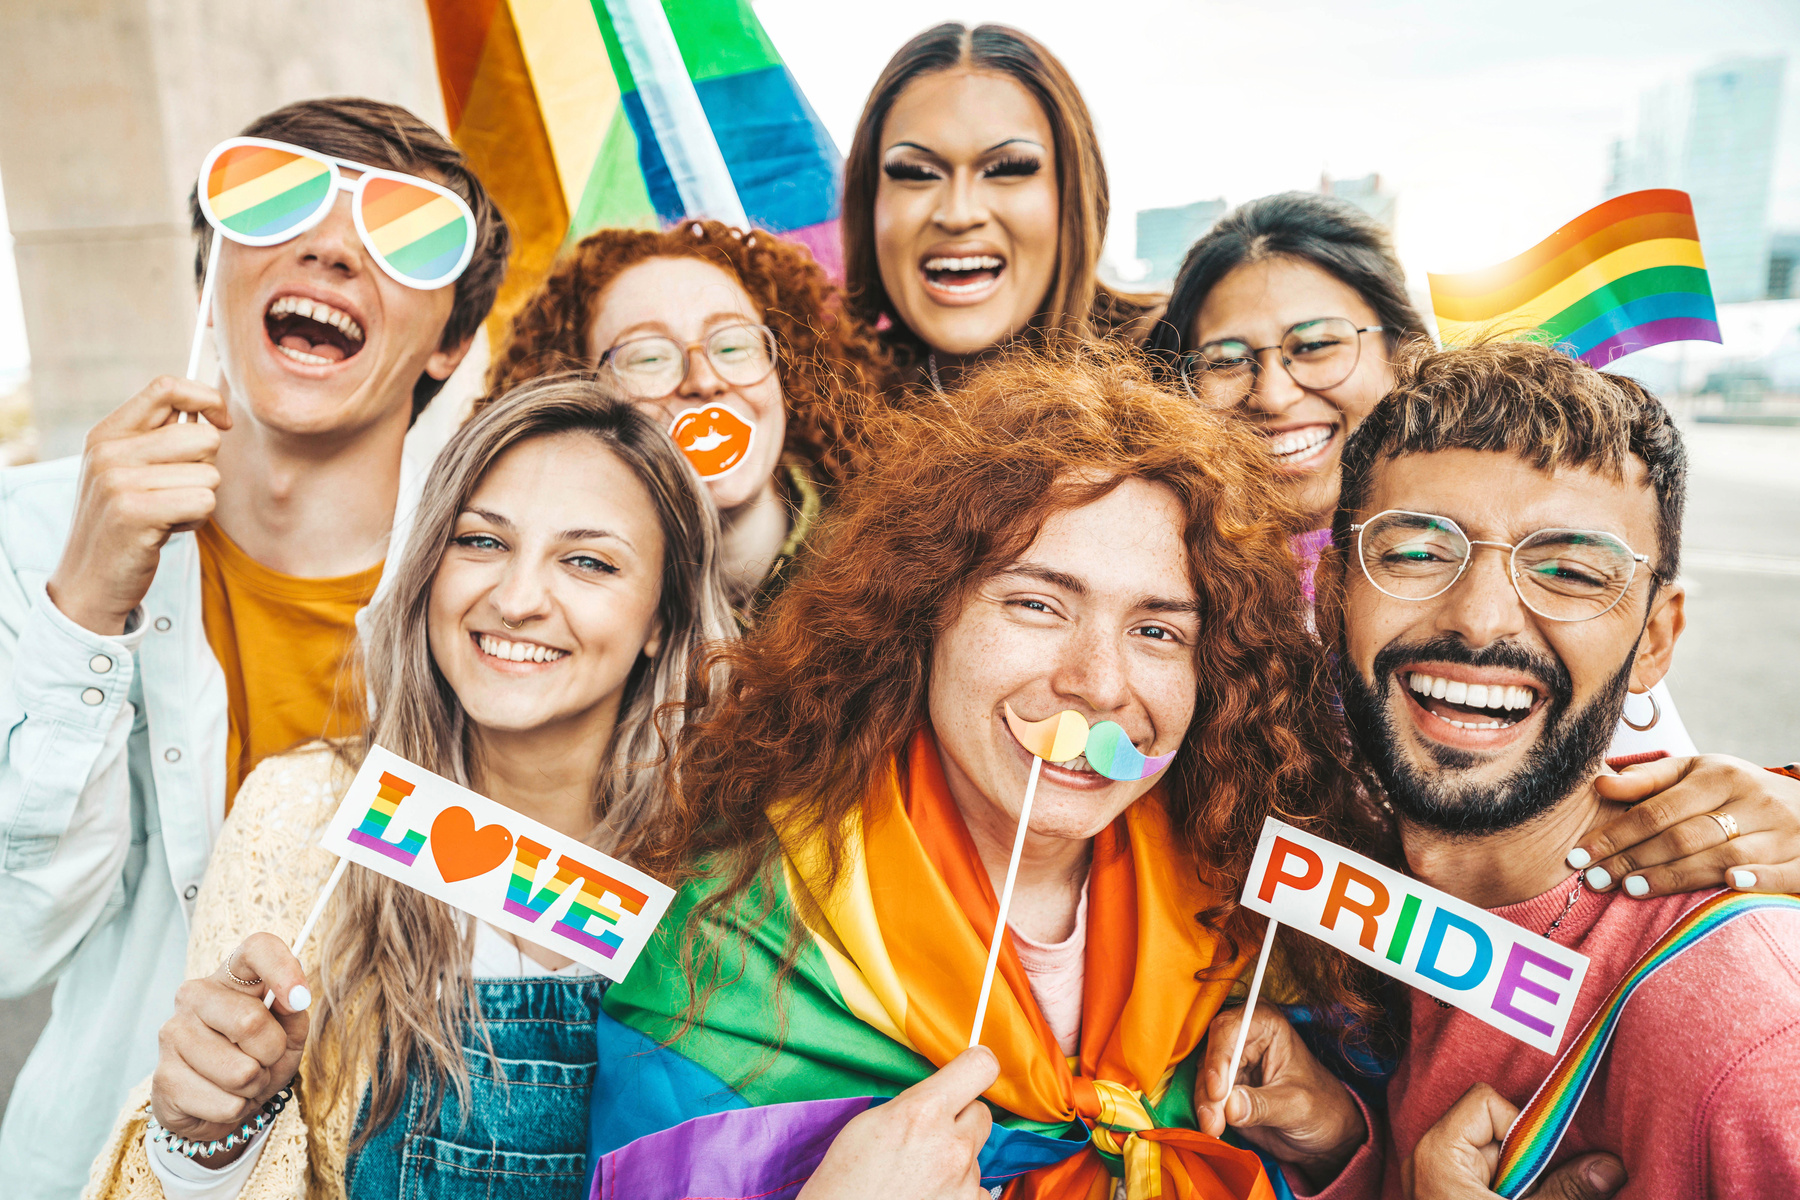 Diverse group of young people celebrating gay pride festival day